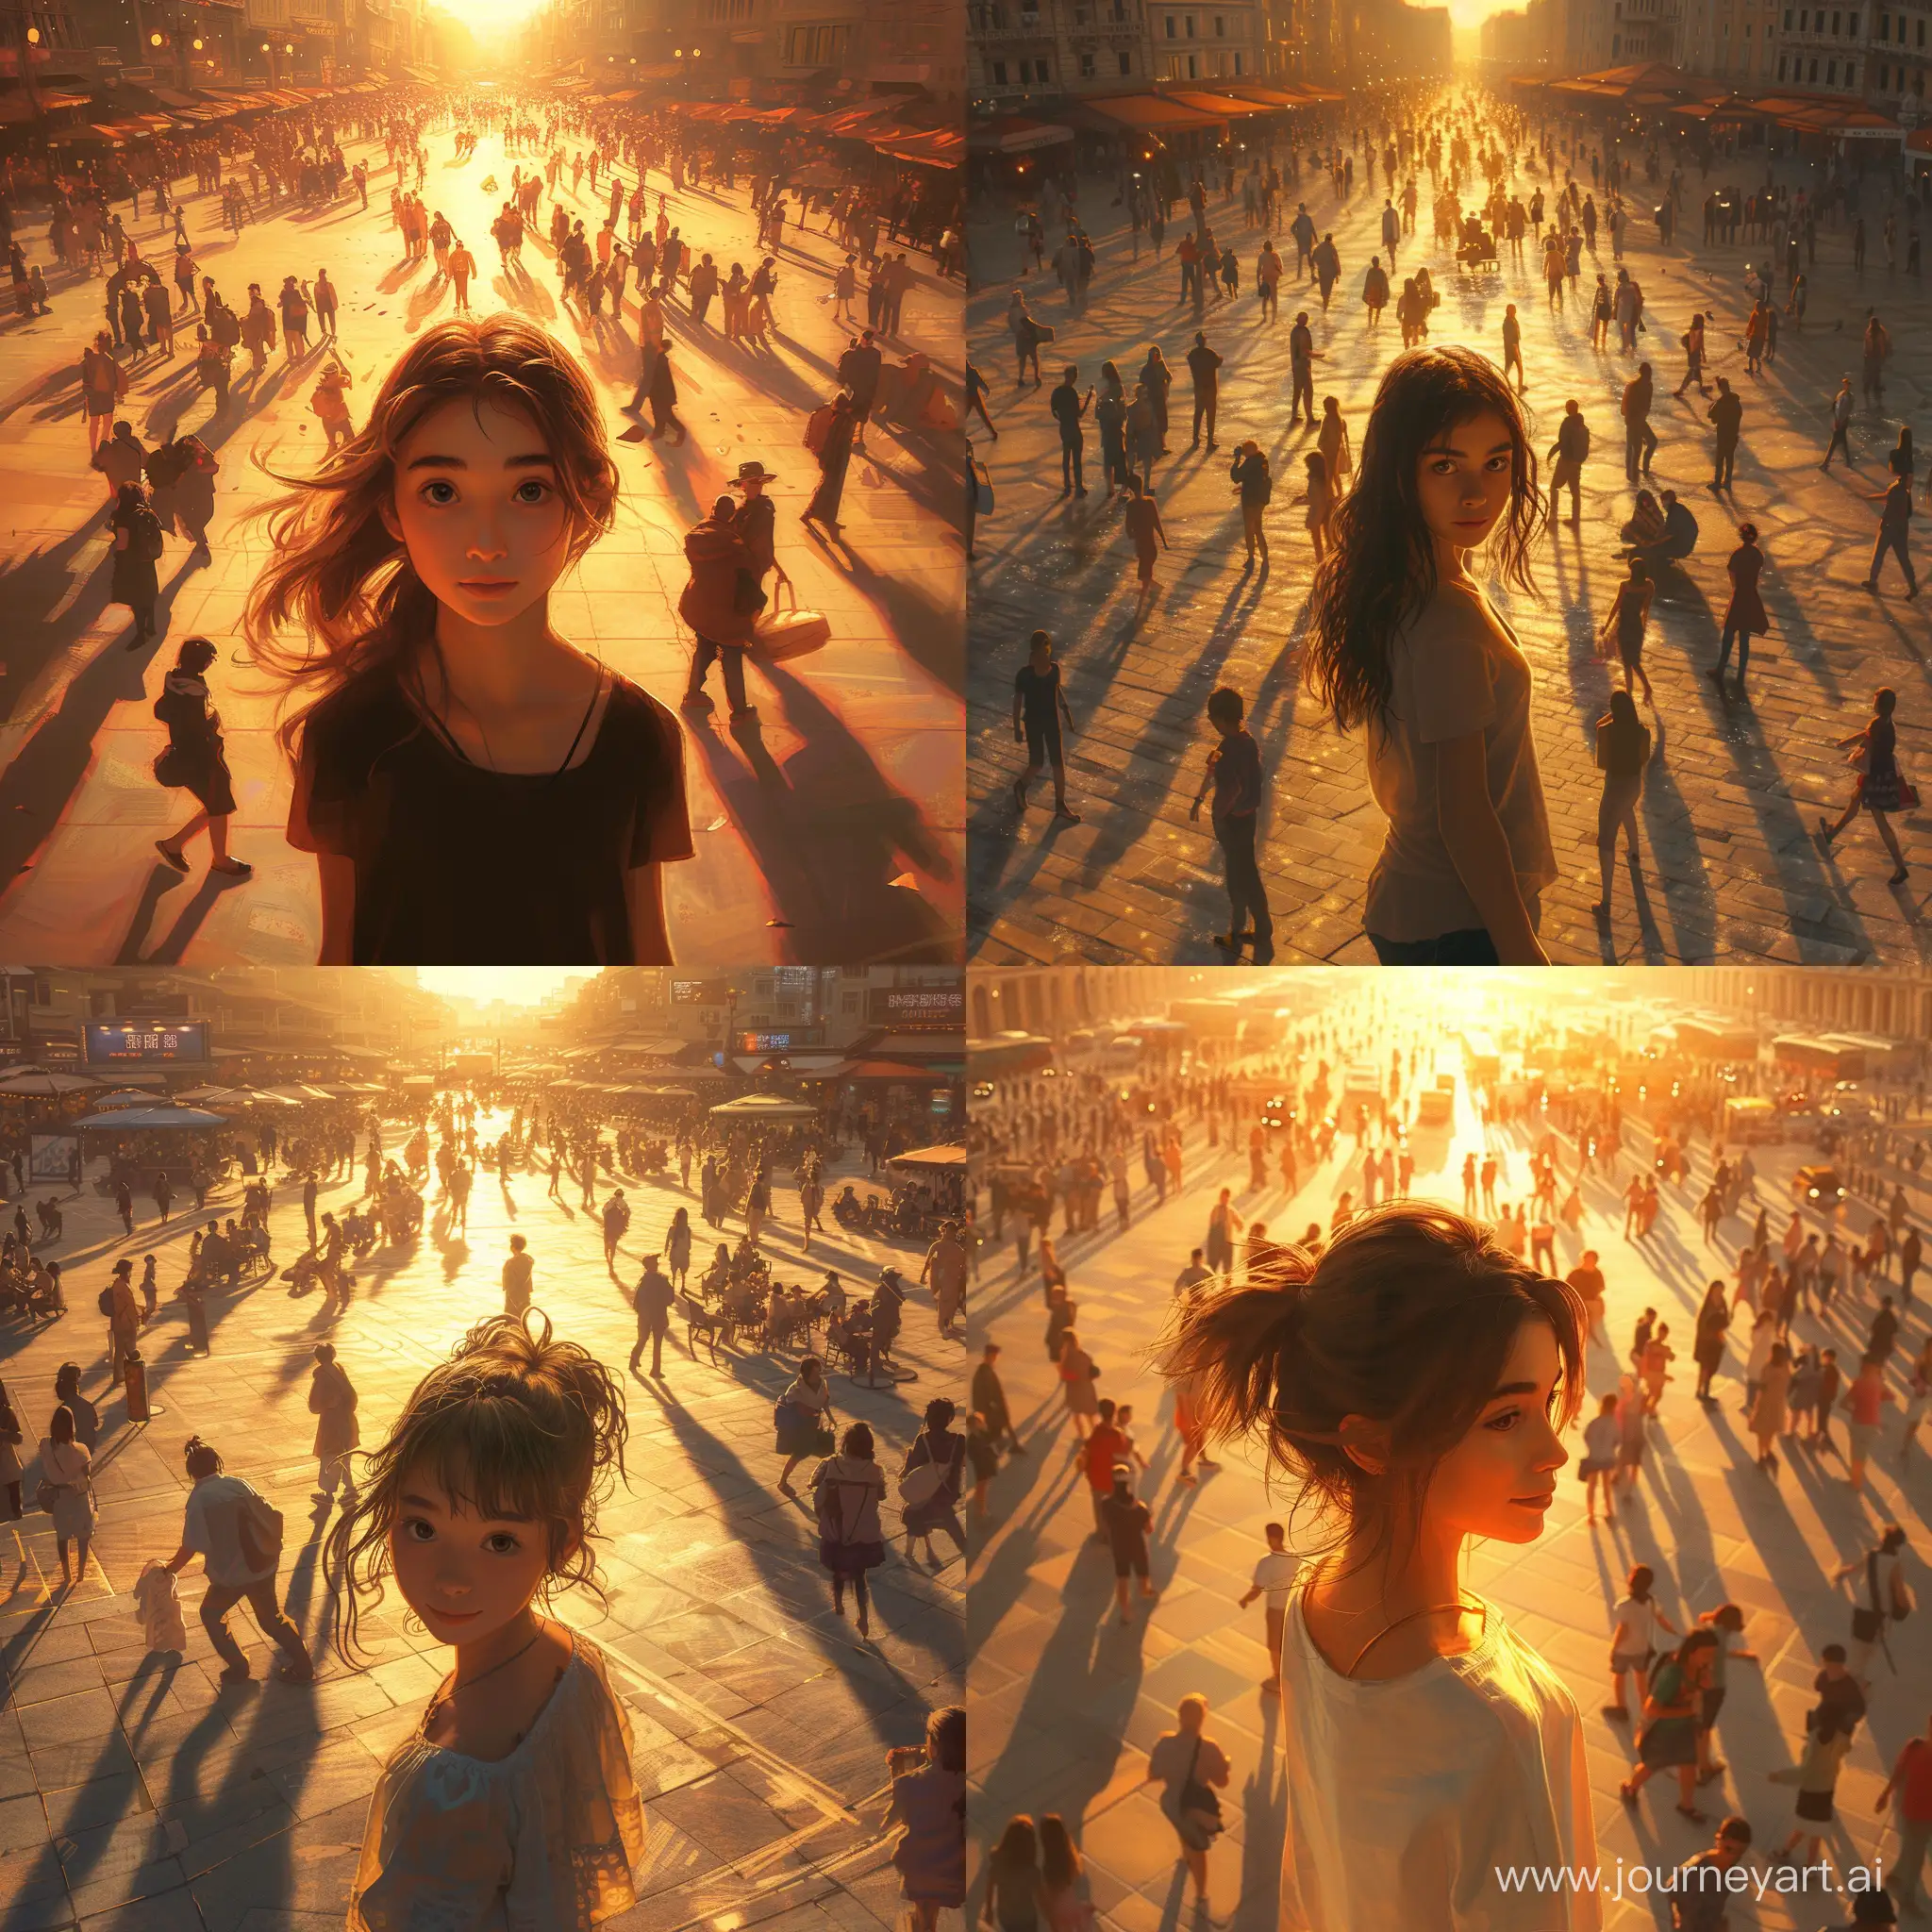  Create a lifelike depiction of a girl with contemporary hair standing in the midst of a busy square flooded with golden-hour light. The square is filled with diverse people engaging in various activities, and the warm glow of the setting sun enhances the lively urban scene.